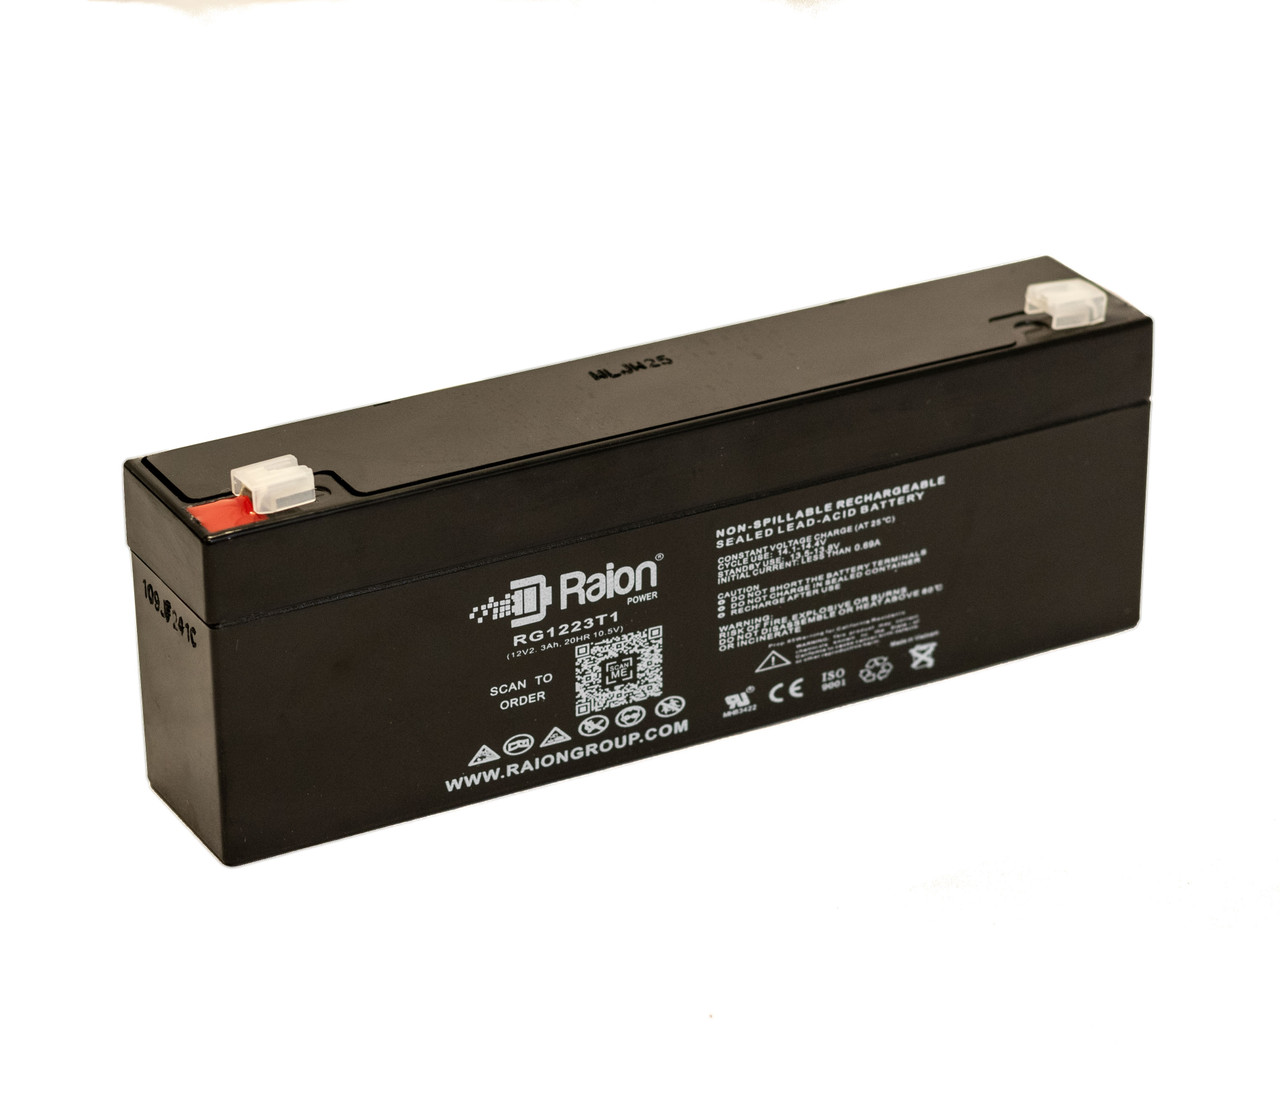 Raion Power RG1223T1 Replacement Battery for Alexander G1219